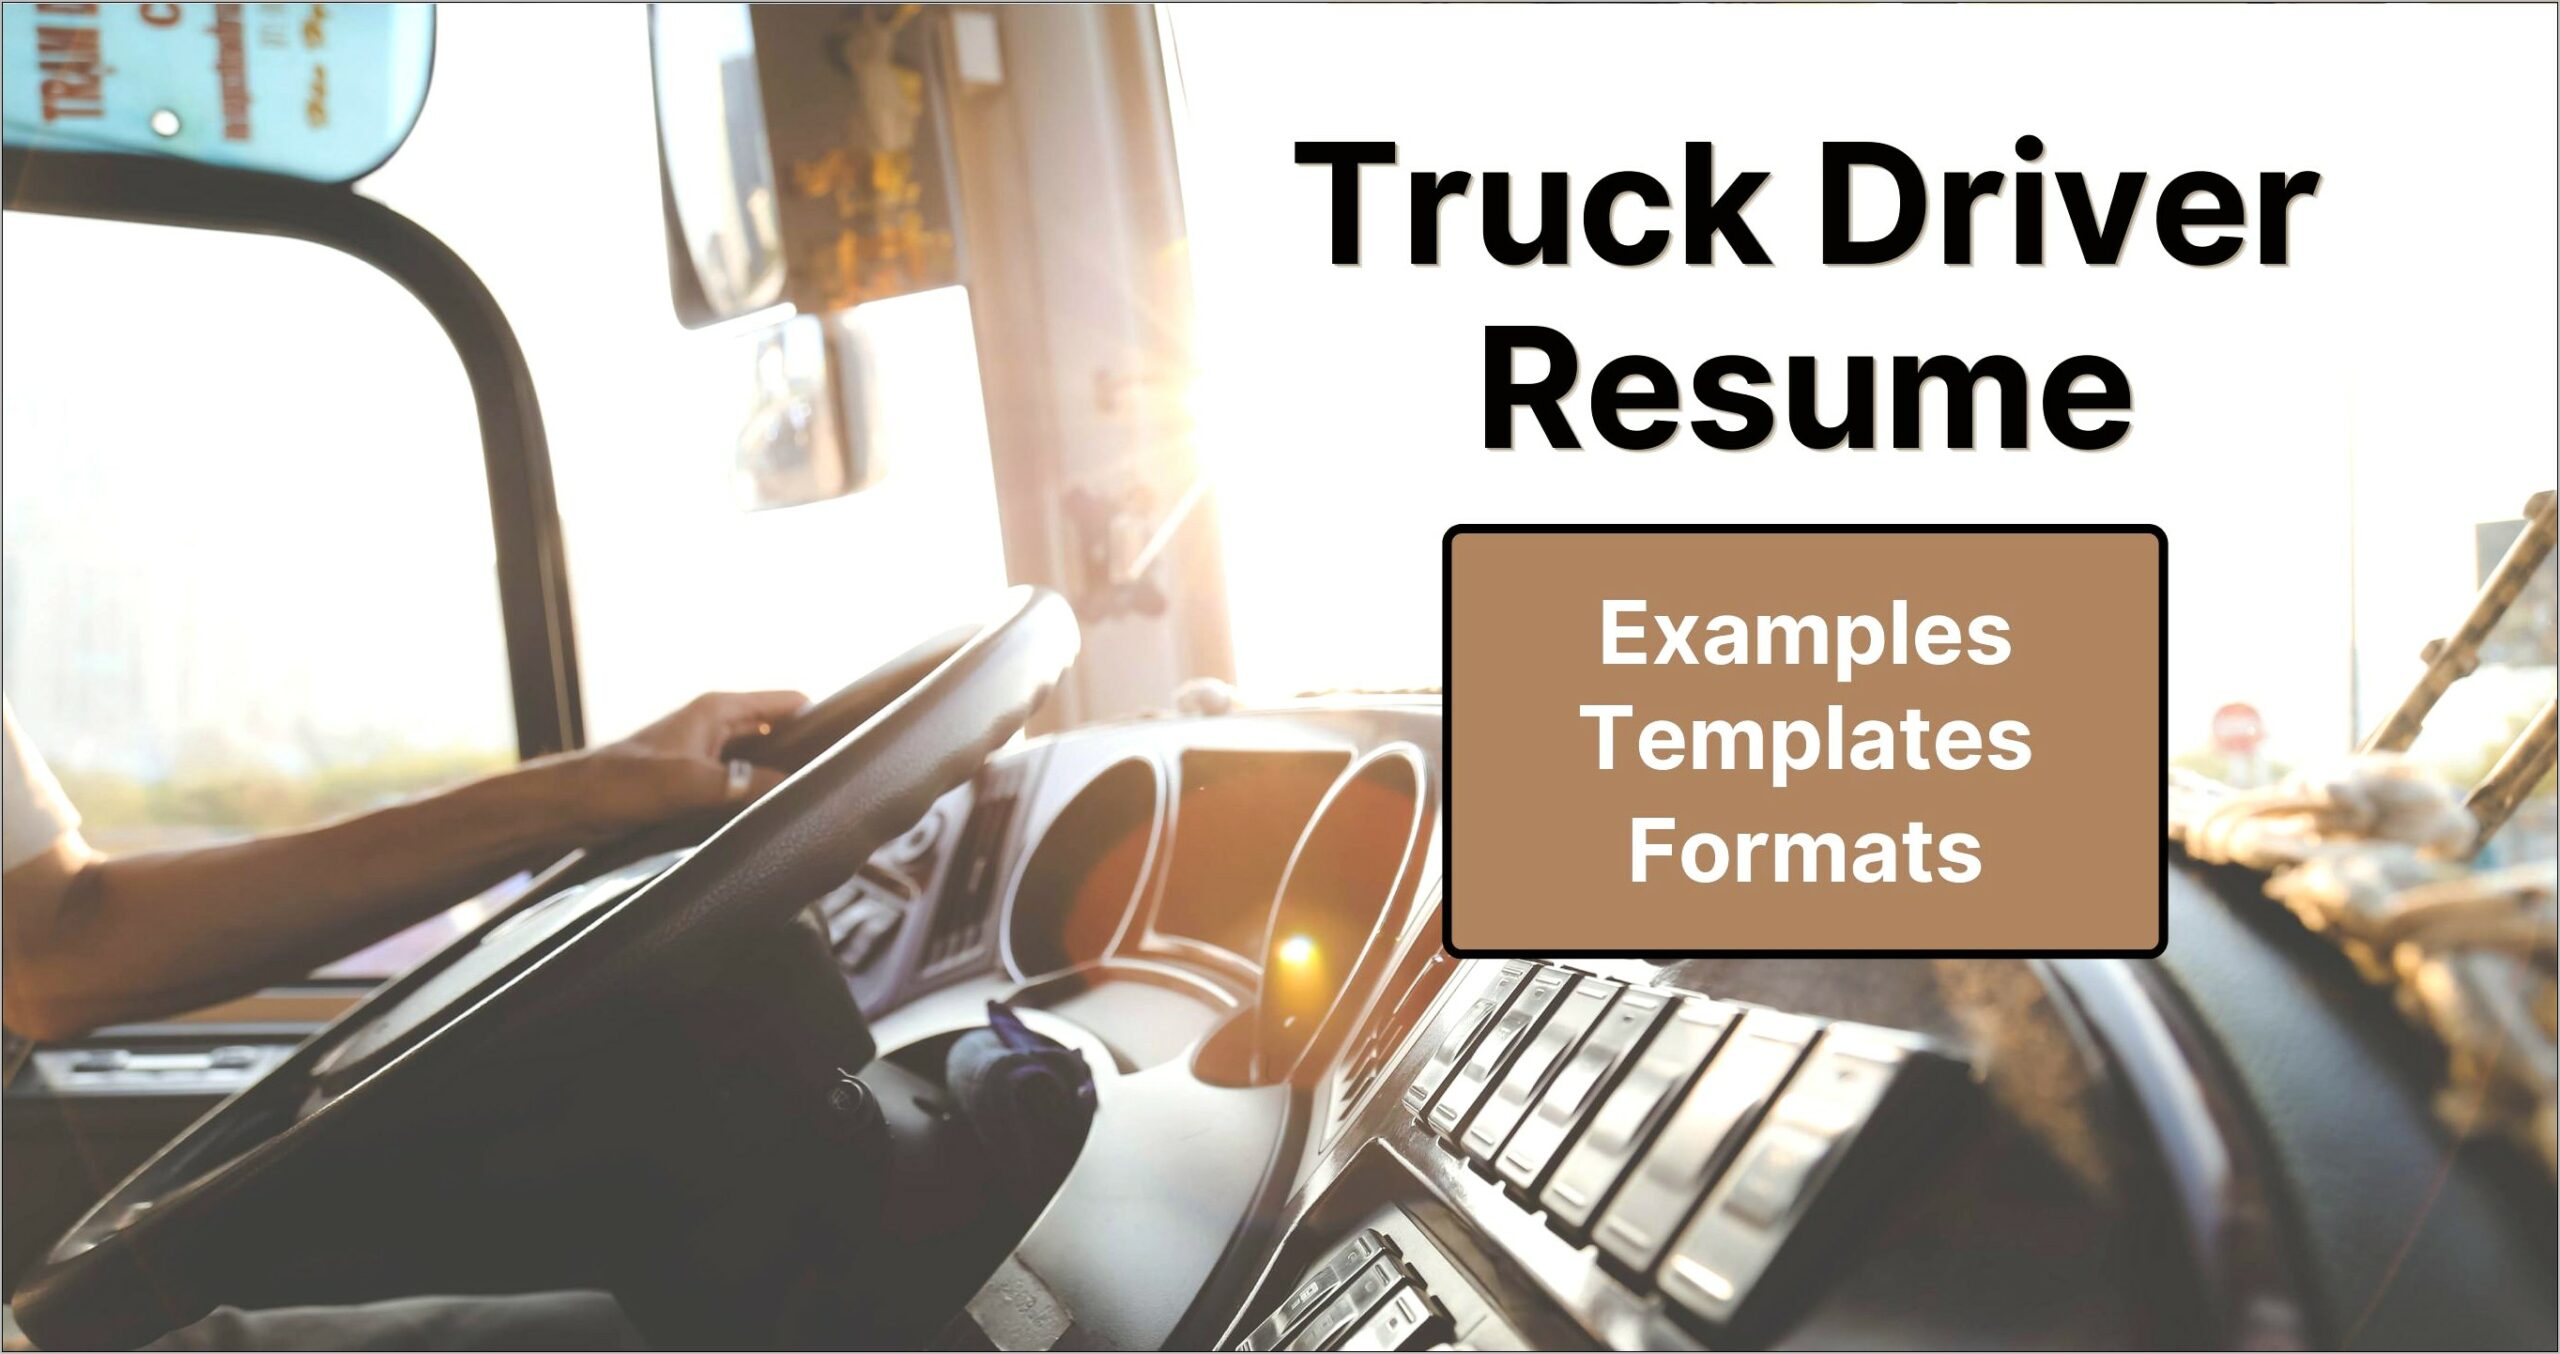 Truck Driver Resume Summary Examples